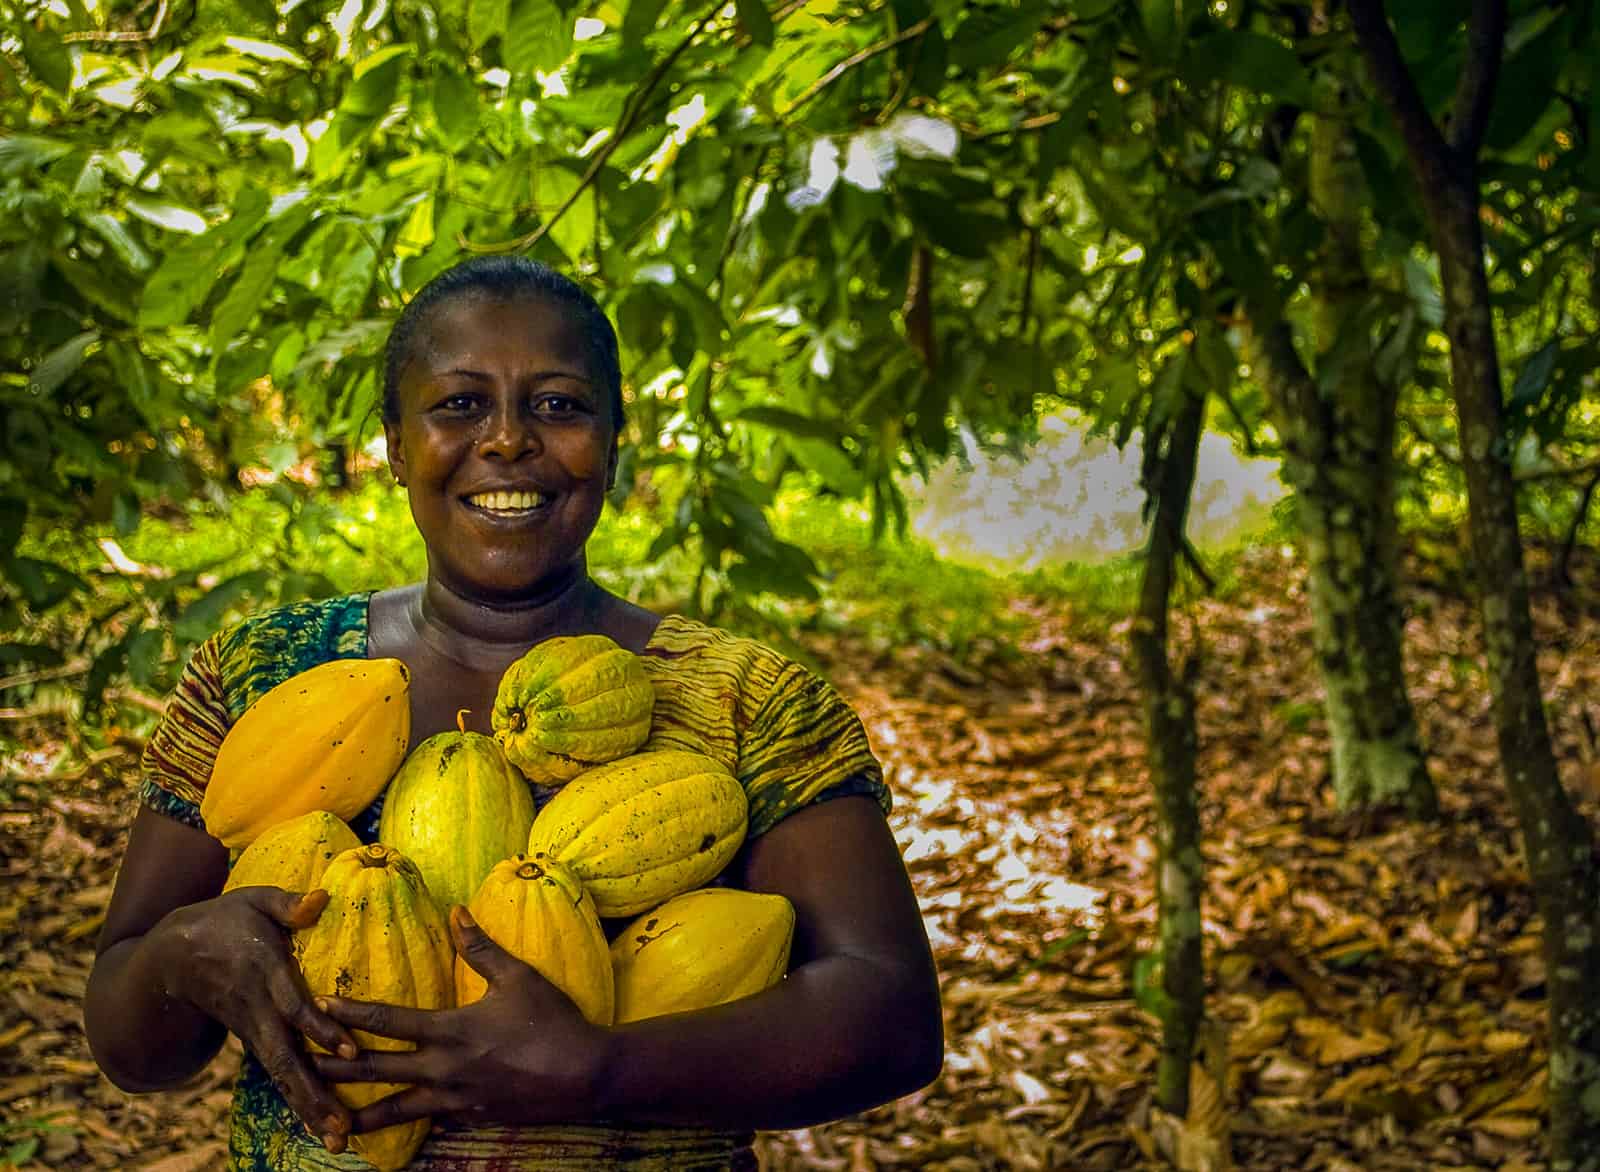 A woman stands smiling and holding a pile of bright yellow fruit surrounded by trees in the Amazon rainforest.